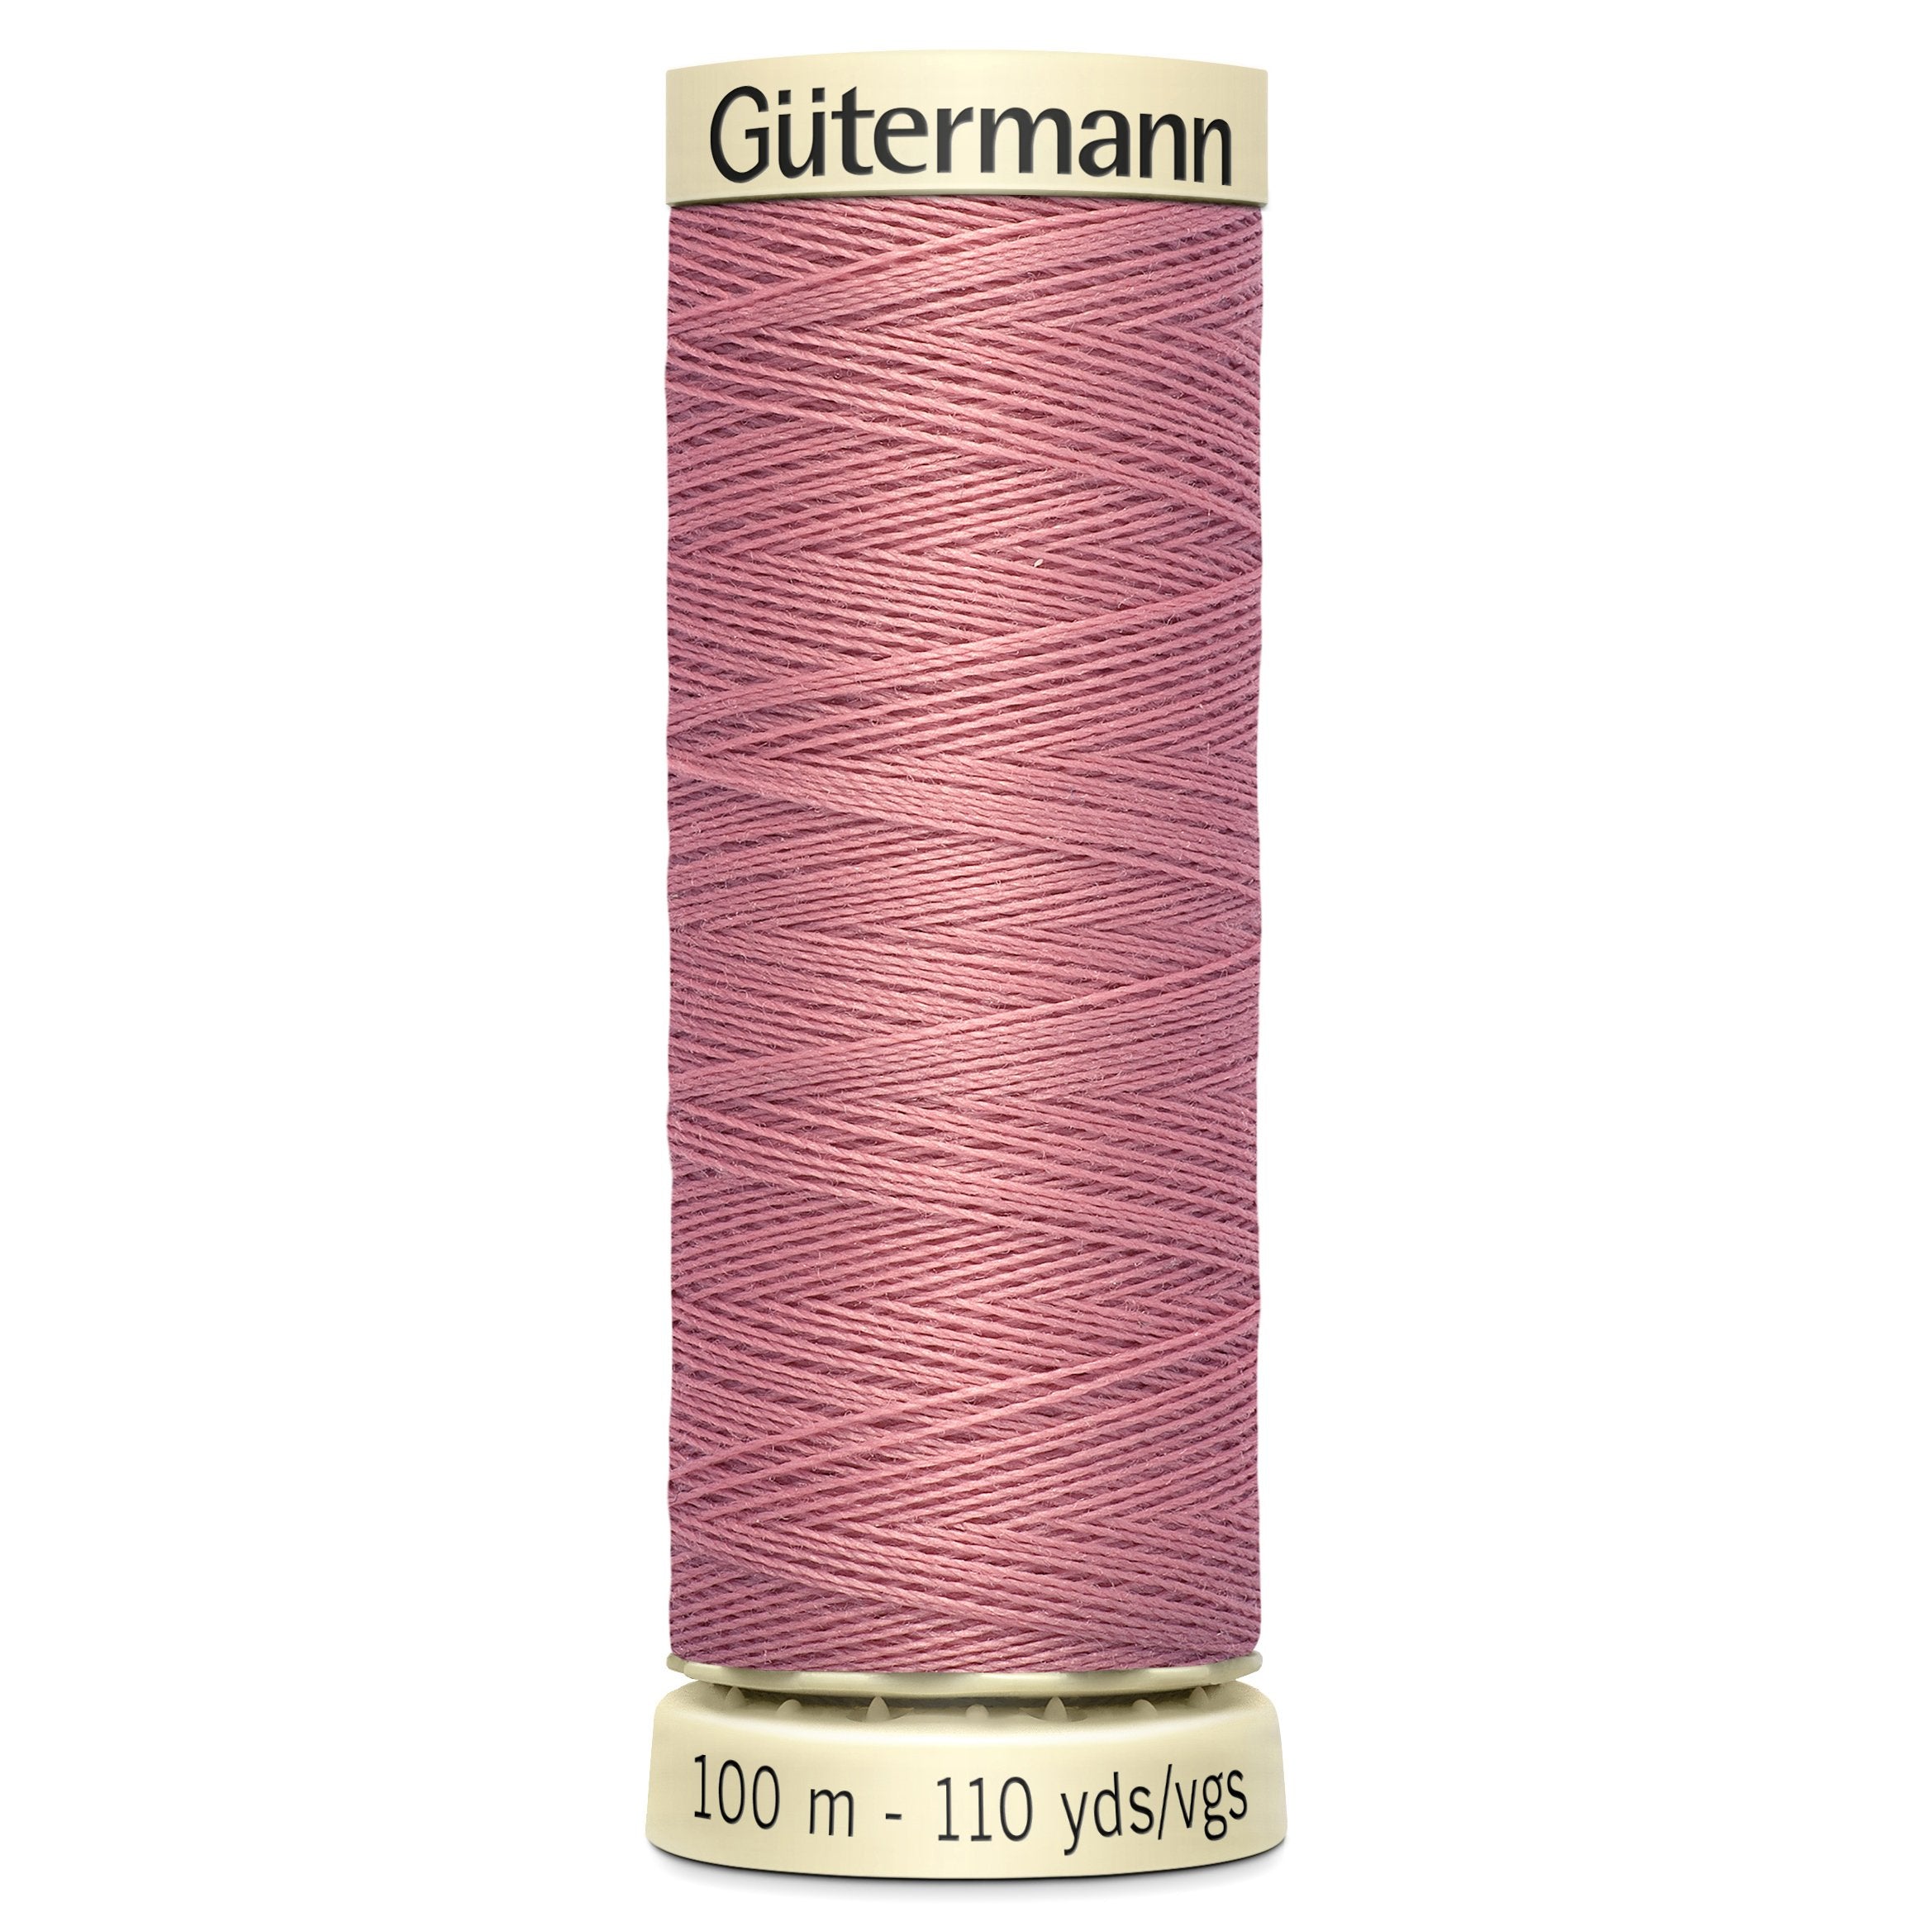 Gutermann Sew All Thread colour 473 Dusky Pink from Jaycotts Sewing Supplies